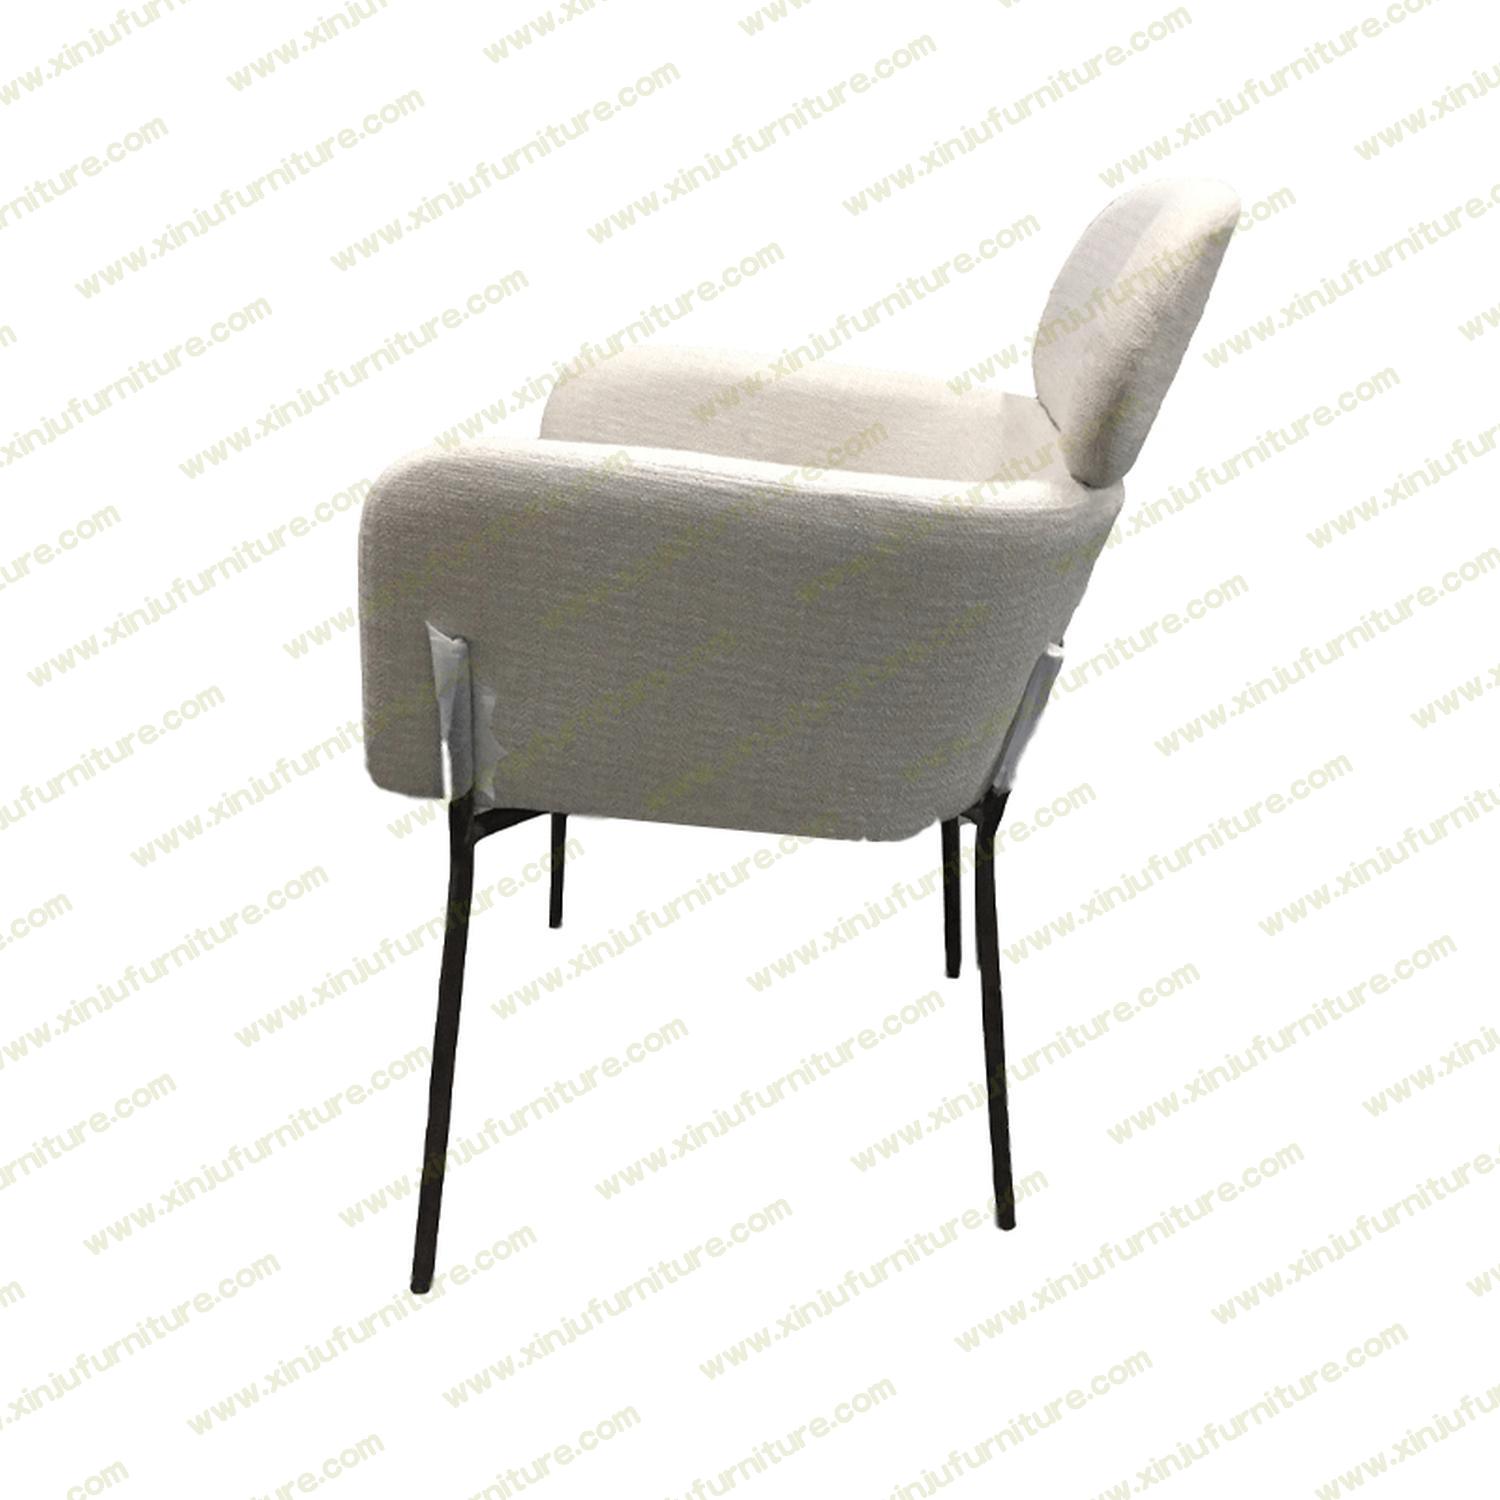 Comfortable living room leisure chair high backrest